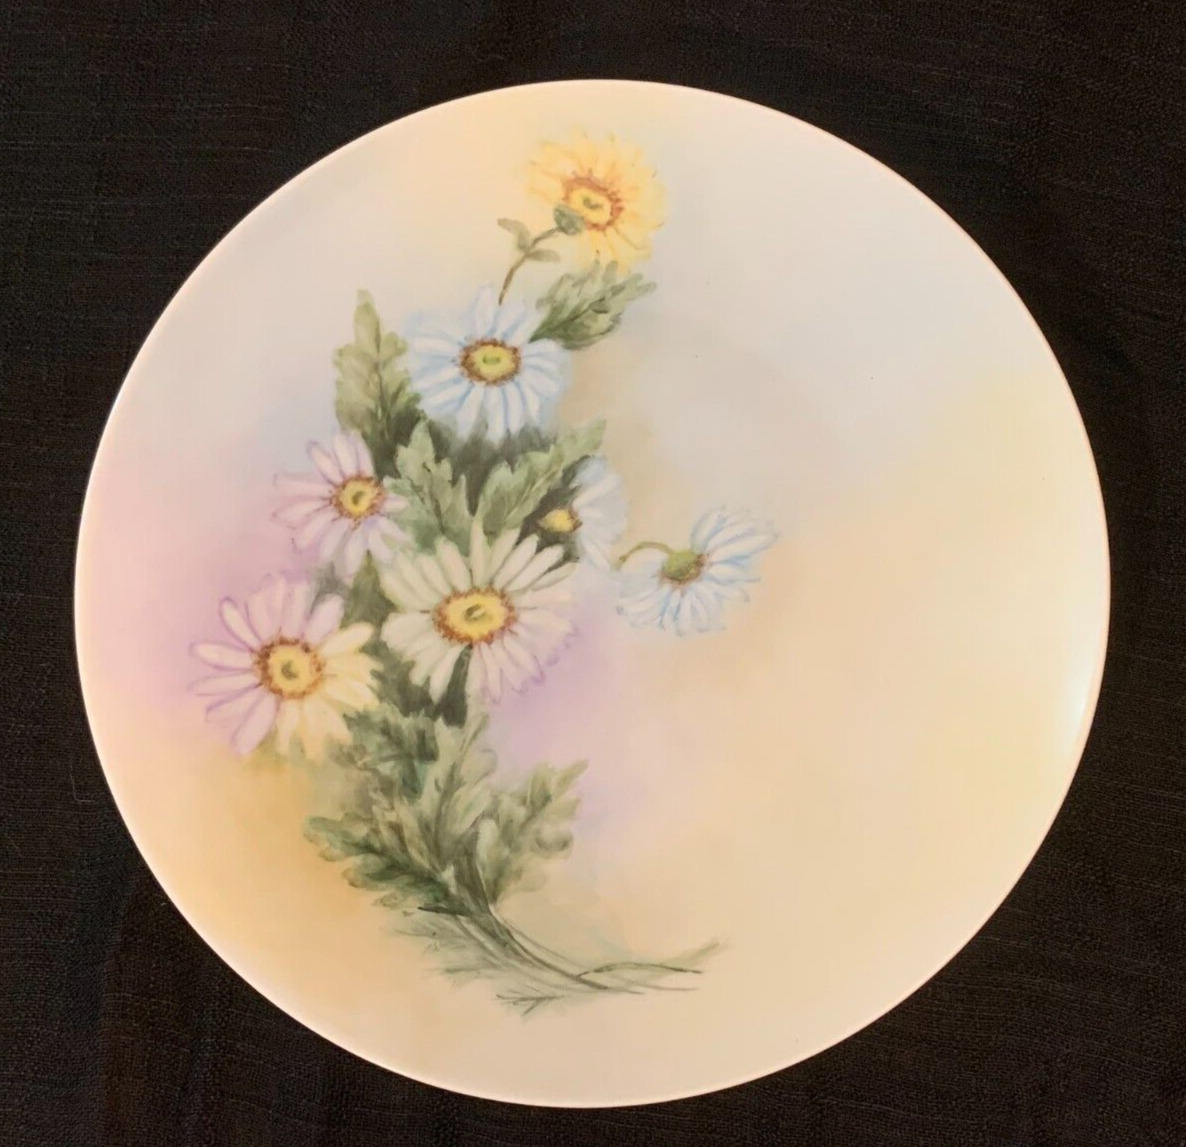 Daisy Flowers Vtg Hand Painted Porcelain Plate Cottage Chic Fannie Bussey